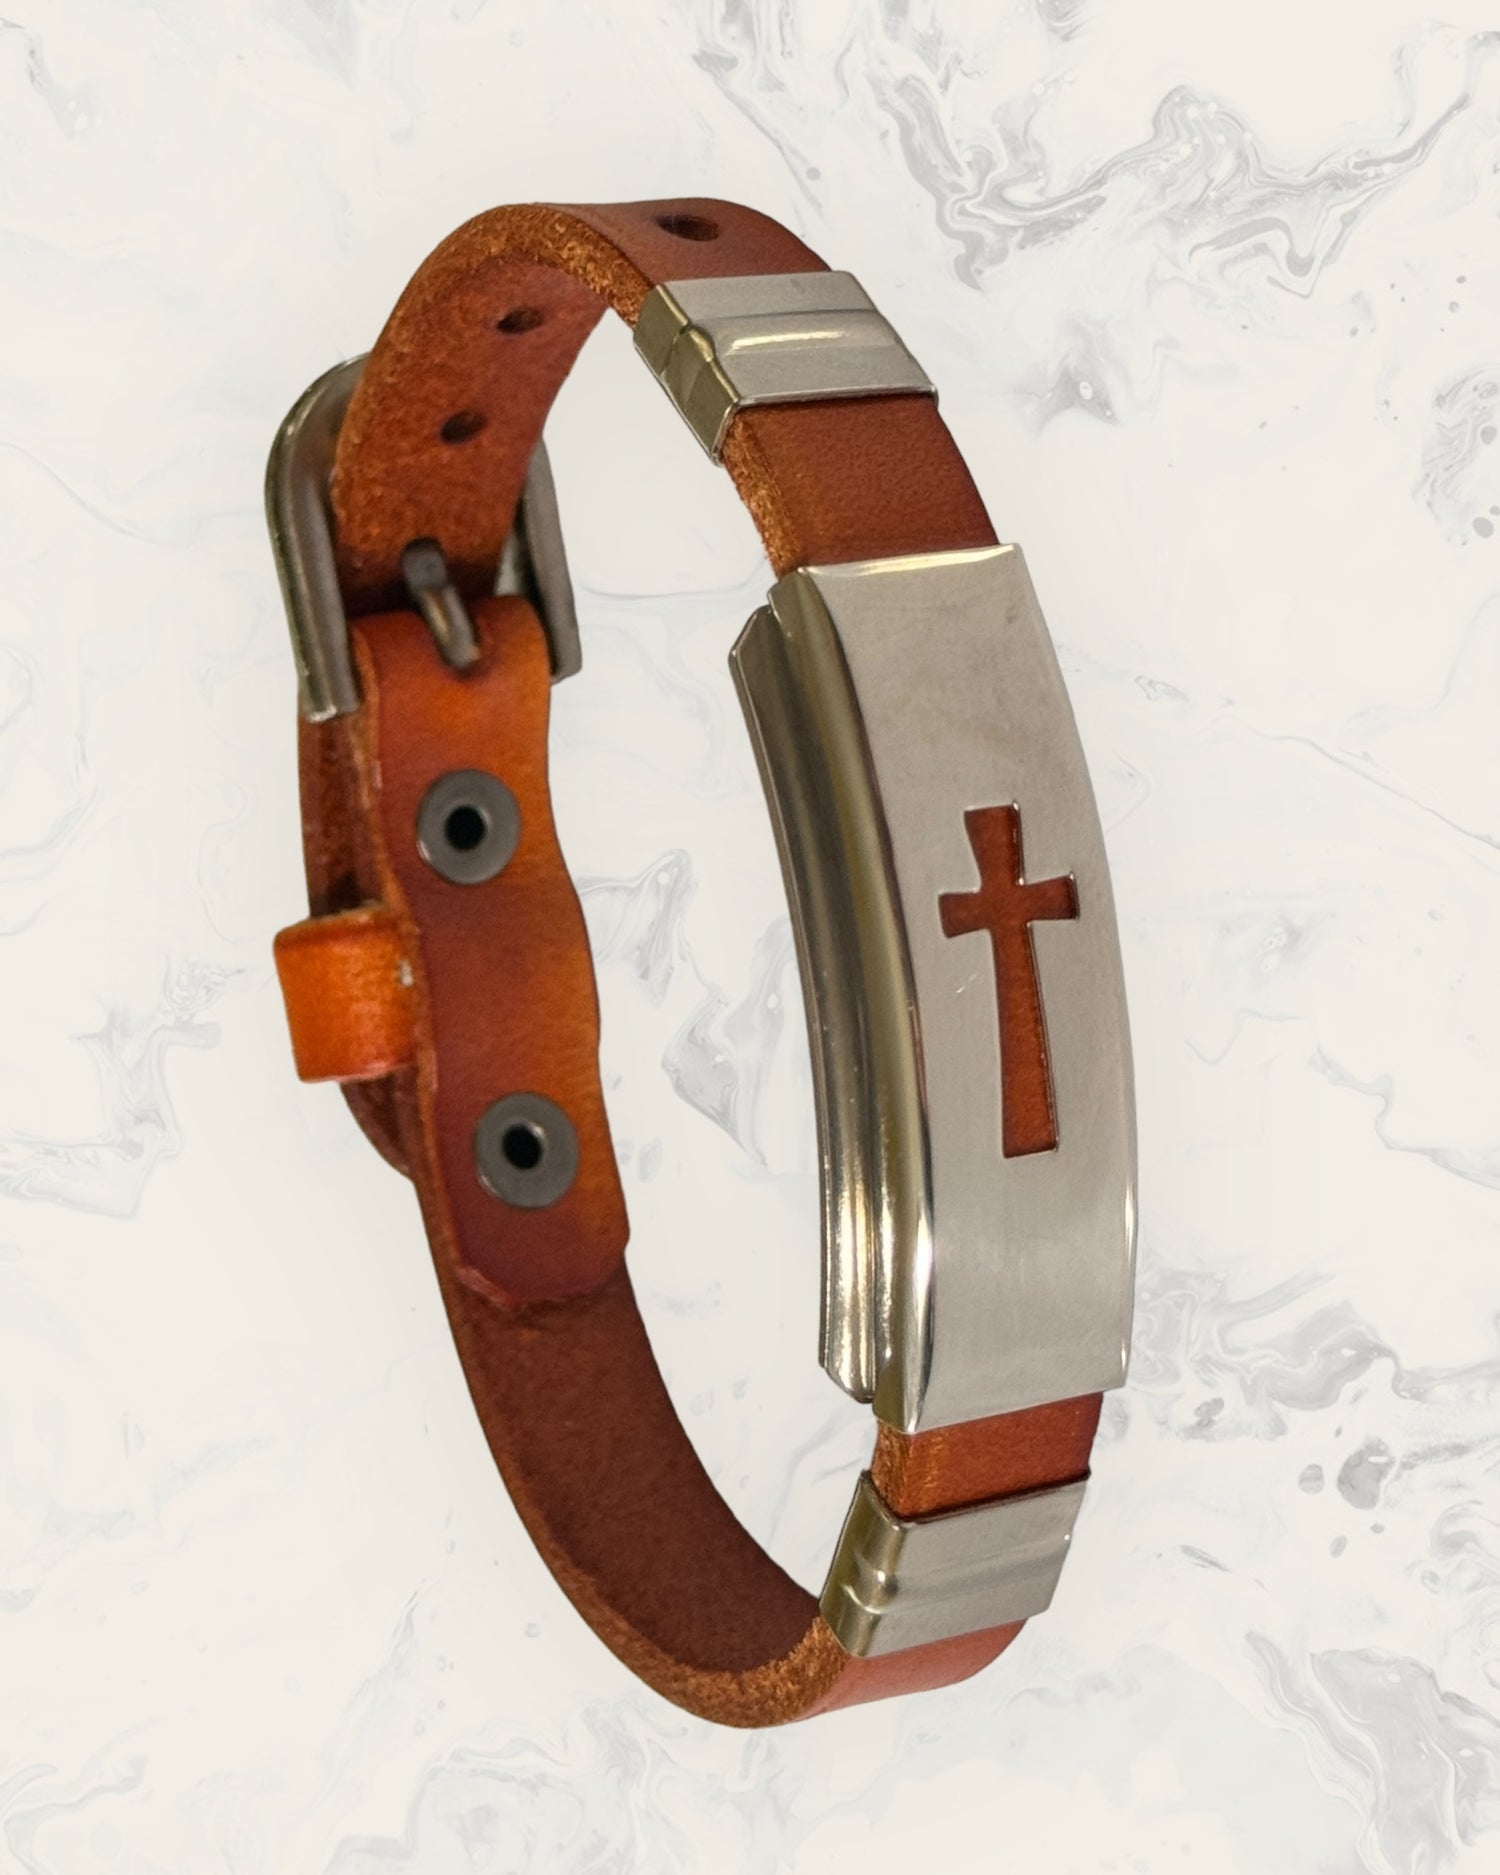 Natural Pain Relief and EMF Protection Bracelet Leather Band Color Burnt Orange with Cross design on a silver metal slider